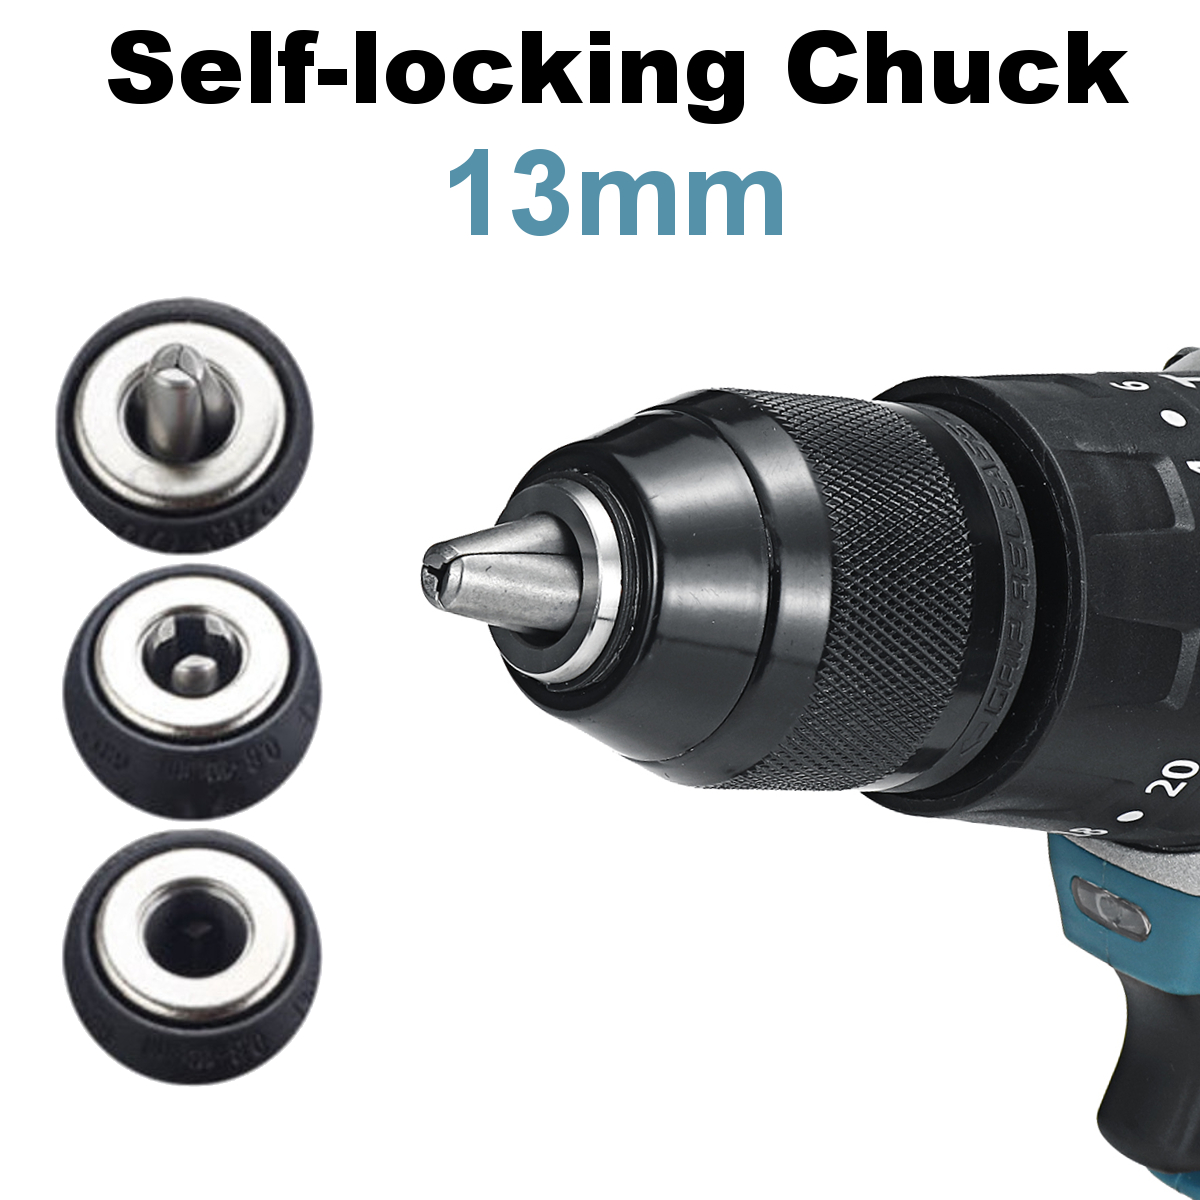 Brushless-Electric-Drill-20-Torque-520NM-Cordless-Screwdriver-13mm-Chuck-Power-Drill-for-Makita-18V--1801609-10